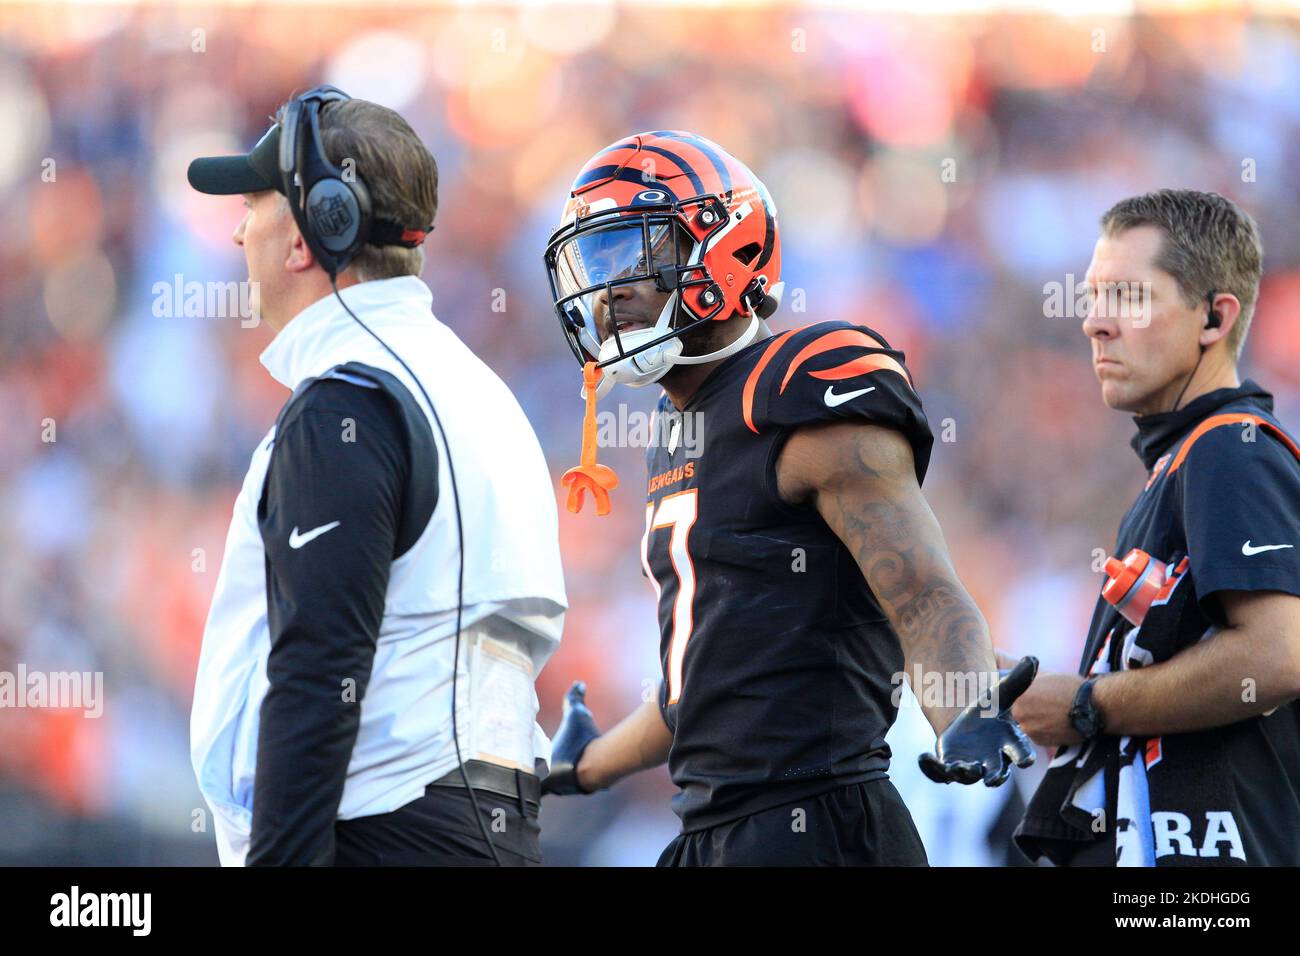 Cincinnati, Ohio, USA. 6th Nov, 2022. Stanley Morgan (17) of the Cincinnati Bengals argues with special teams coach on the sideline during WEEK 9 of the NFL regular season between the Carolina Panthers and Cincinnati Bengals in Cincinnati, Ohio. JP Waldron/Cal Sport Media/Alamy Live News Stock Photo